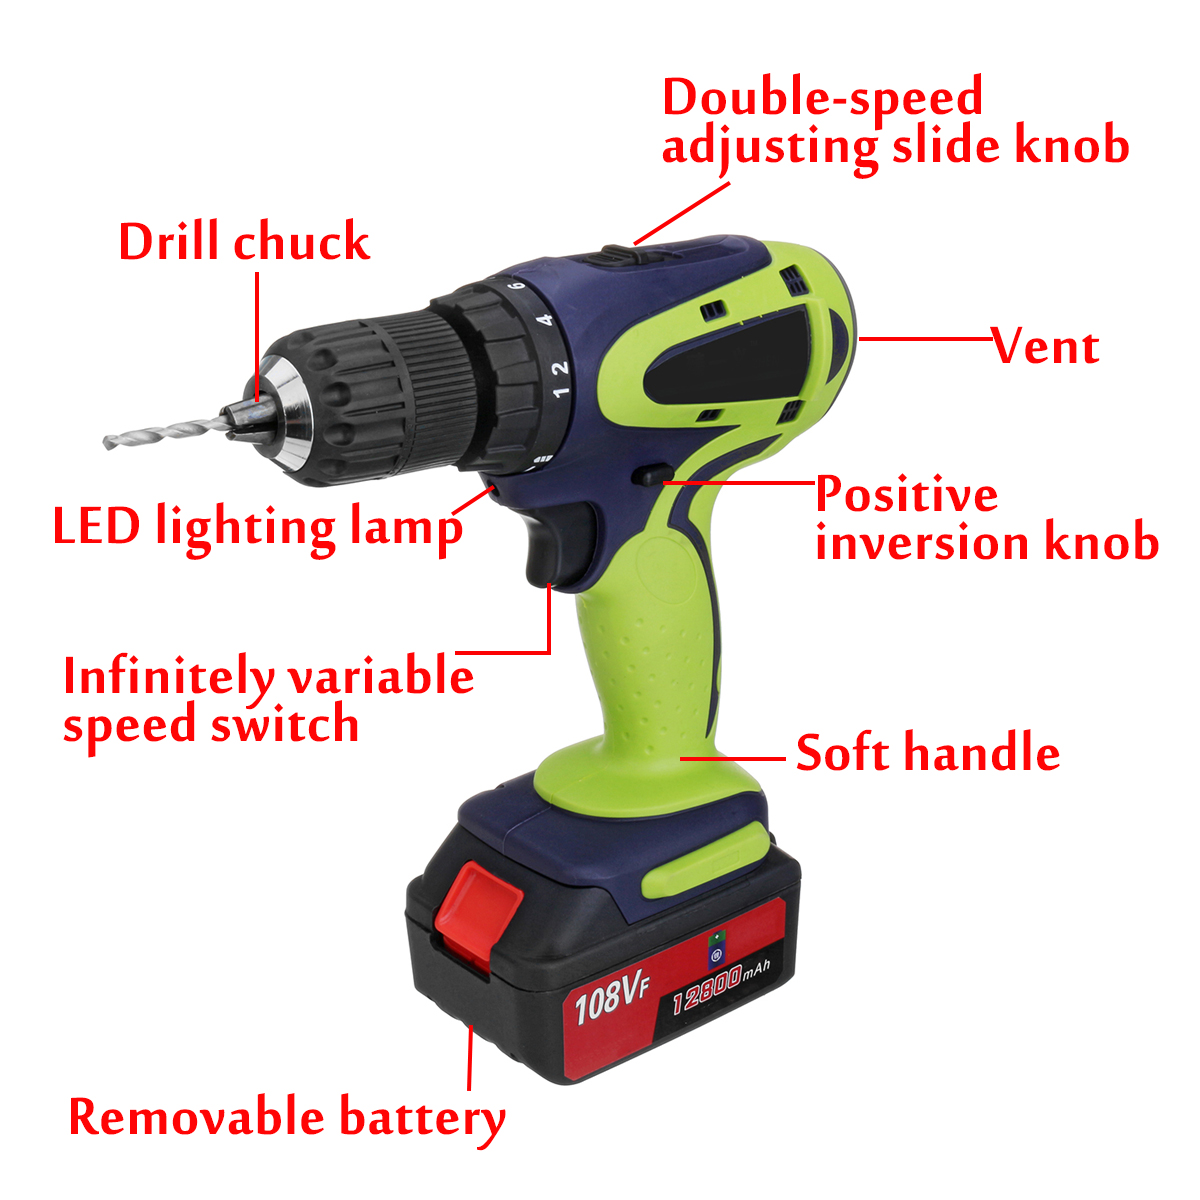 108VF-12800mAh-Dual-Speed-Cordless-Drill-Multifunctional-High-Power-Household-Electric-Drills-W-Acce-1457224-3